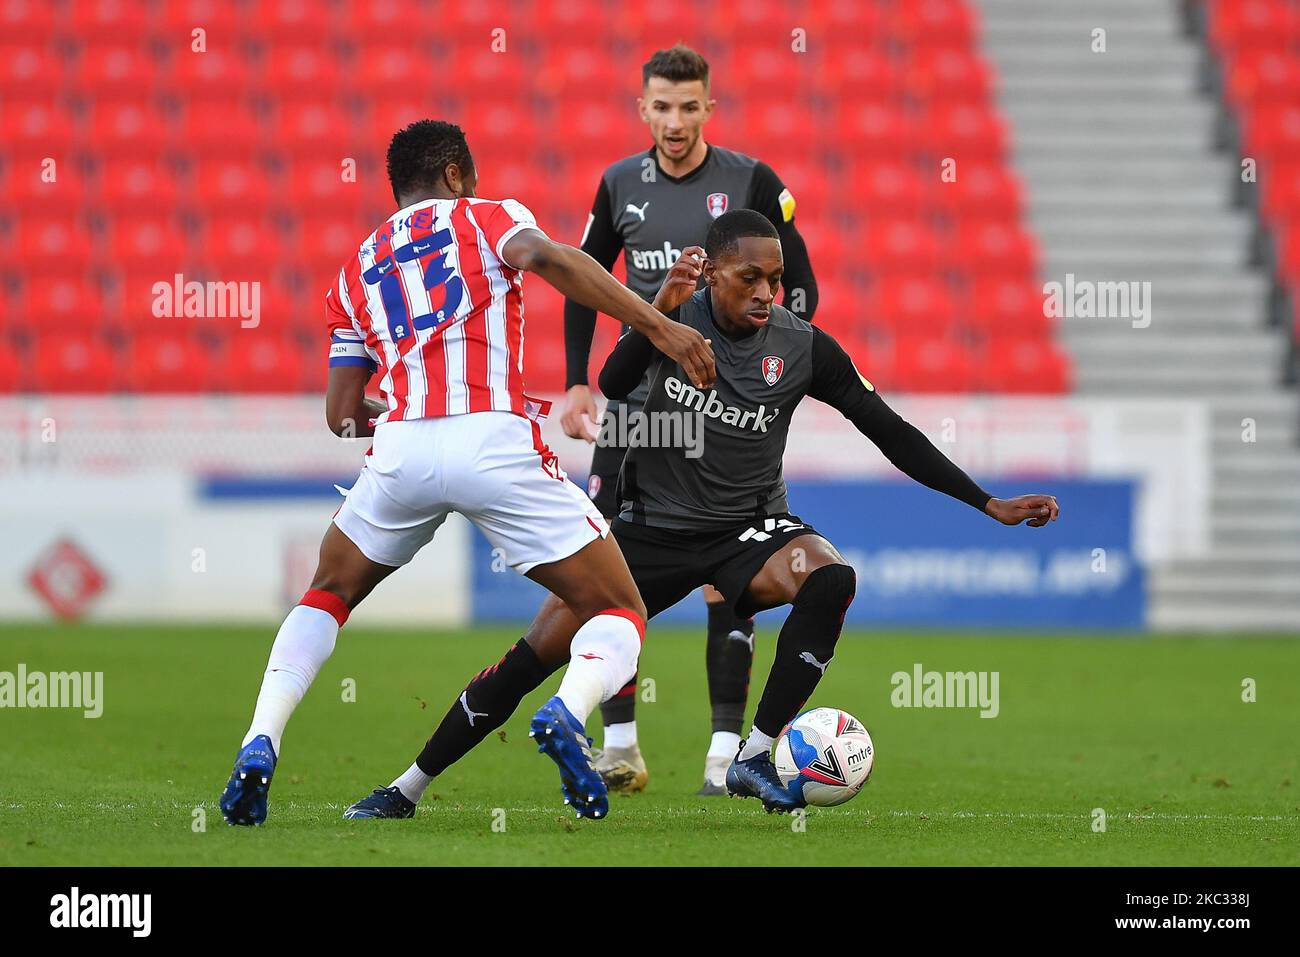 Mickel Miller of Rotherham United battles with Mikel John Obi of Stoke City during the Sky Bet Championship match between Stoke City and Rotherham United at the Britannia Stadium, Stoke-on-Trent on Saturday 31st October 2020. (Photo by Jon Hobley/MI News/NurPhoto) Stock Photo